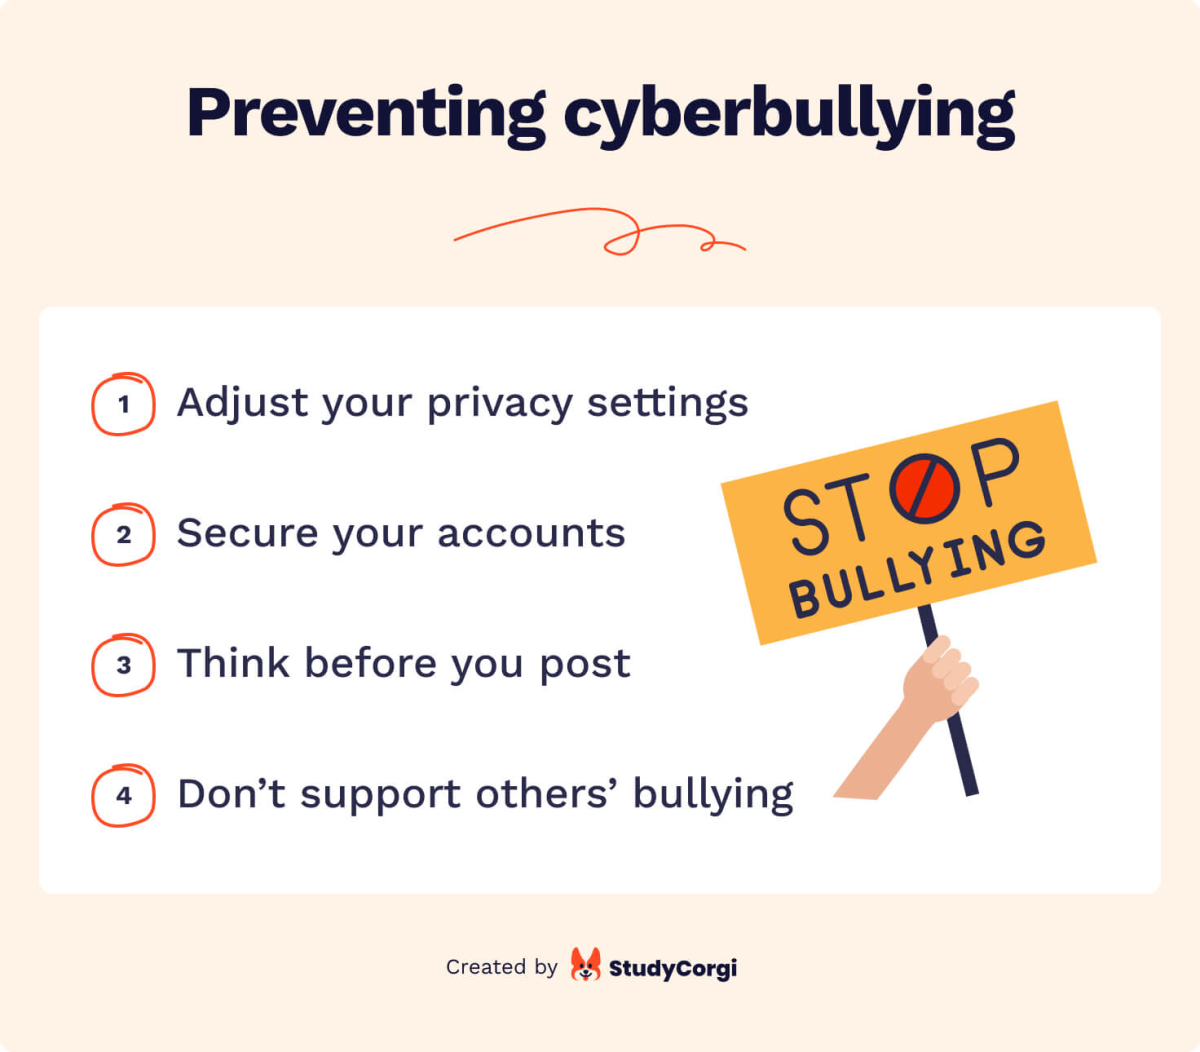 The picture lists 4 tips on preventing cyberbullying.